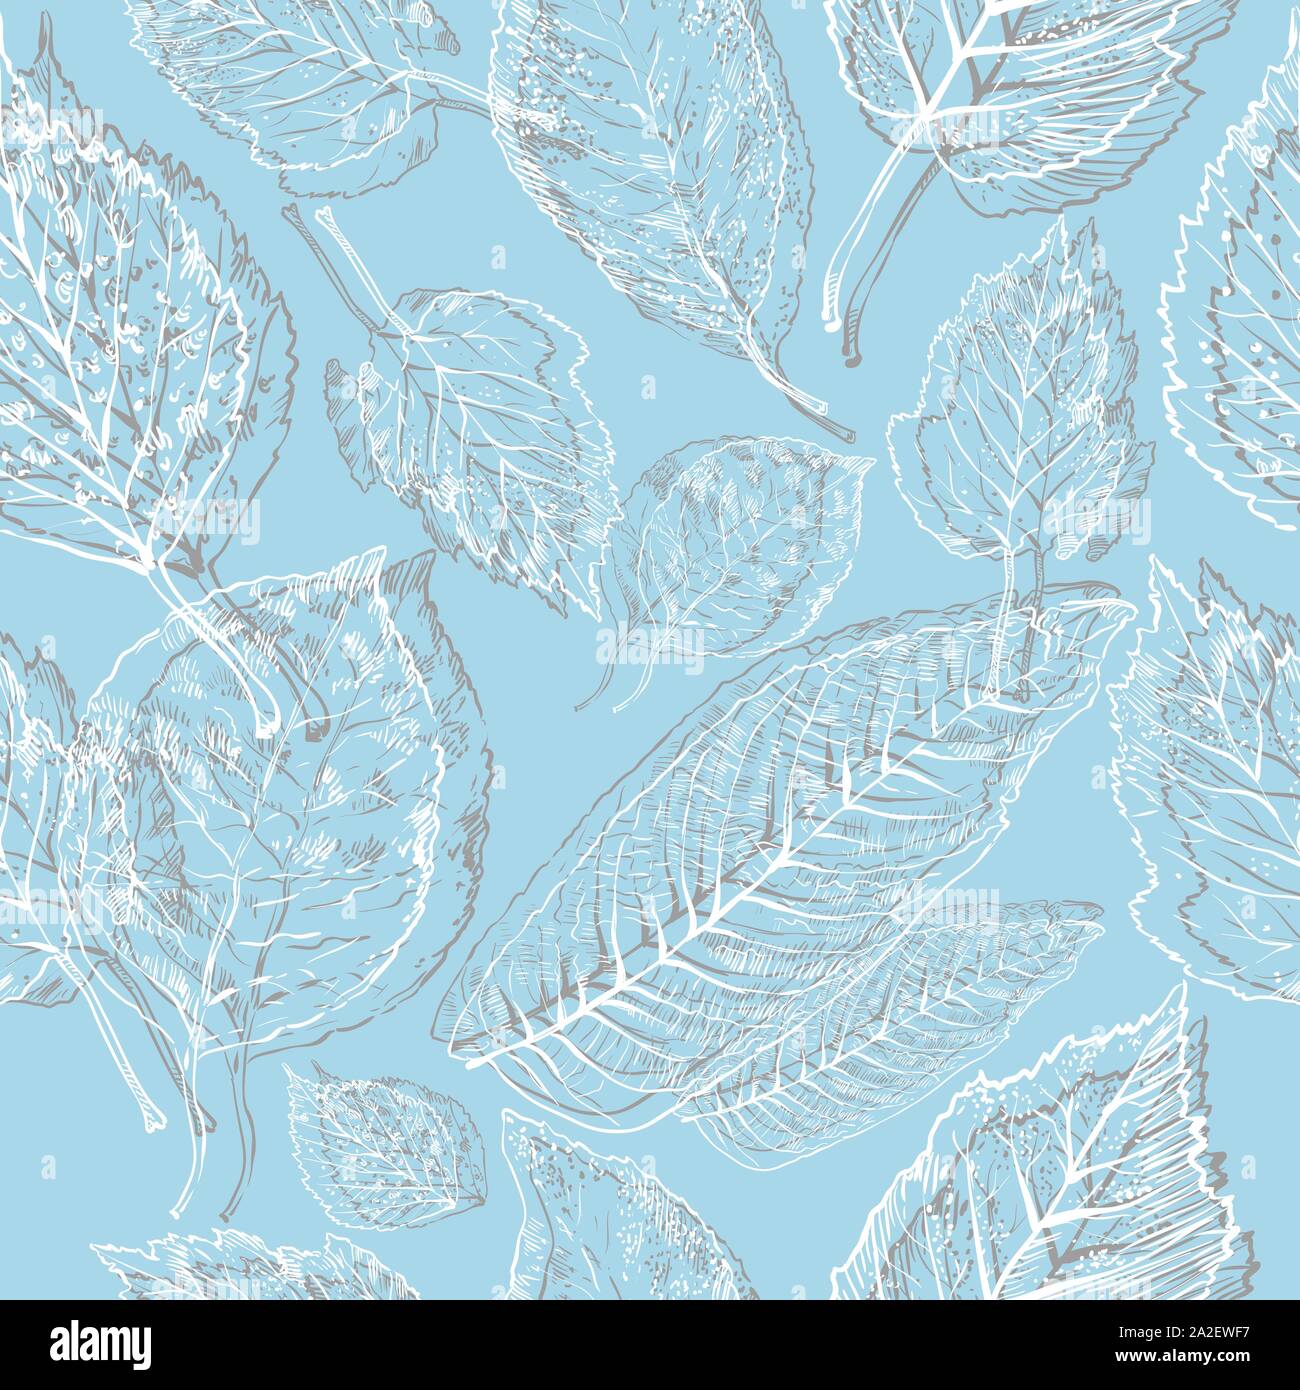 Vector autumn hand drawing seamless pattern with different leaves in ...